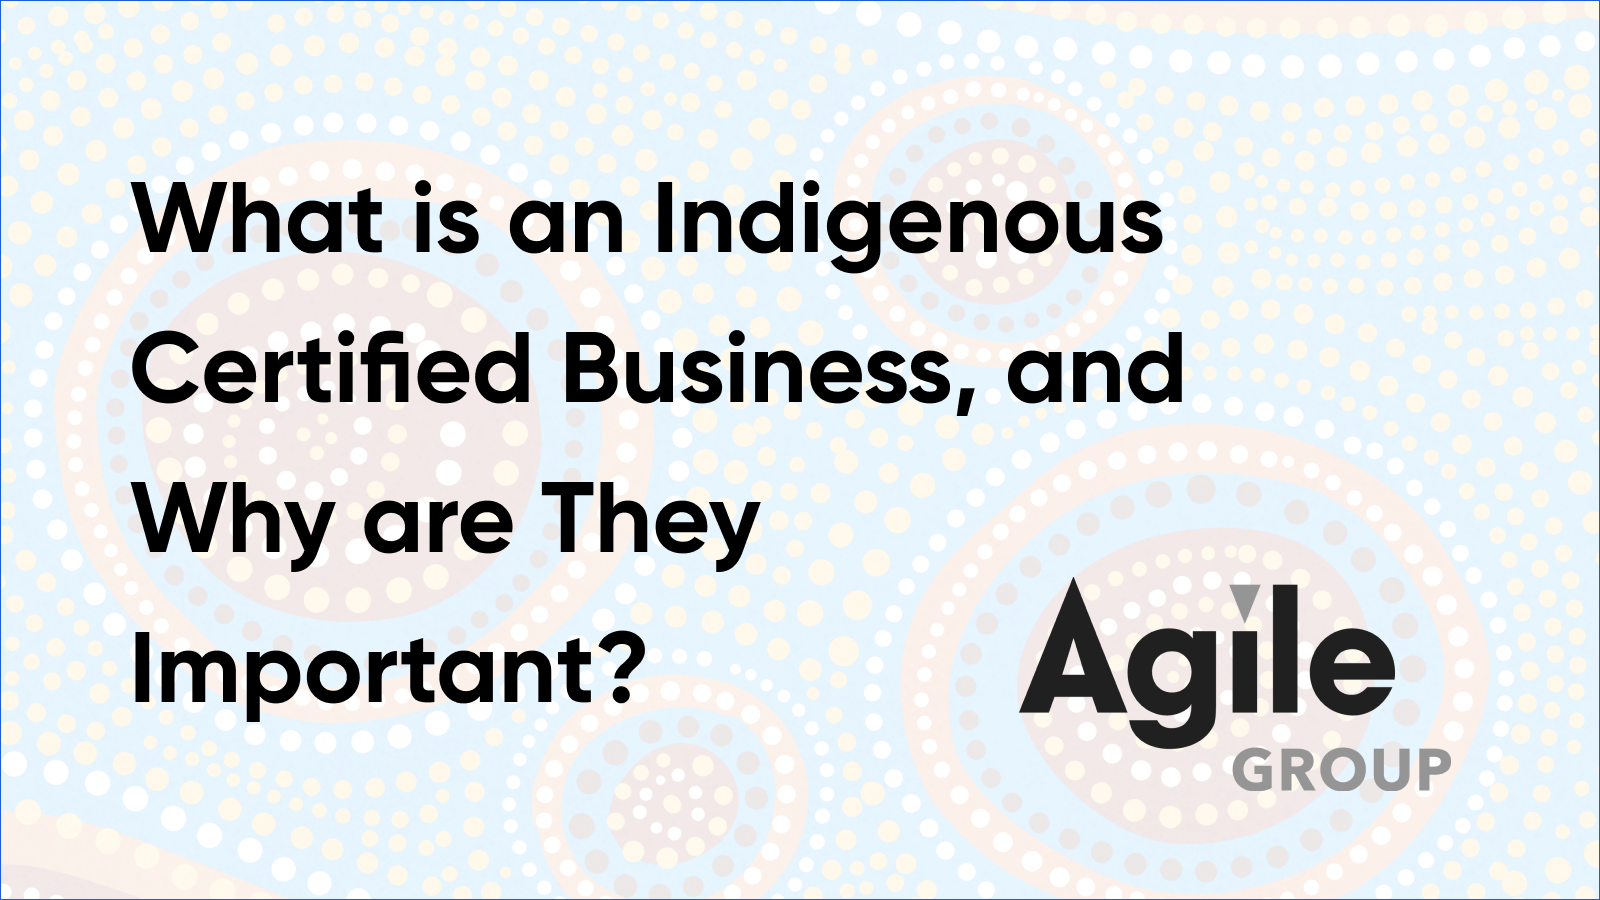 What is an Indigenous Certified Business, and Why are They Important?